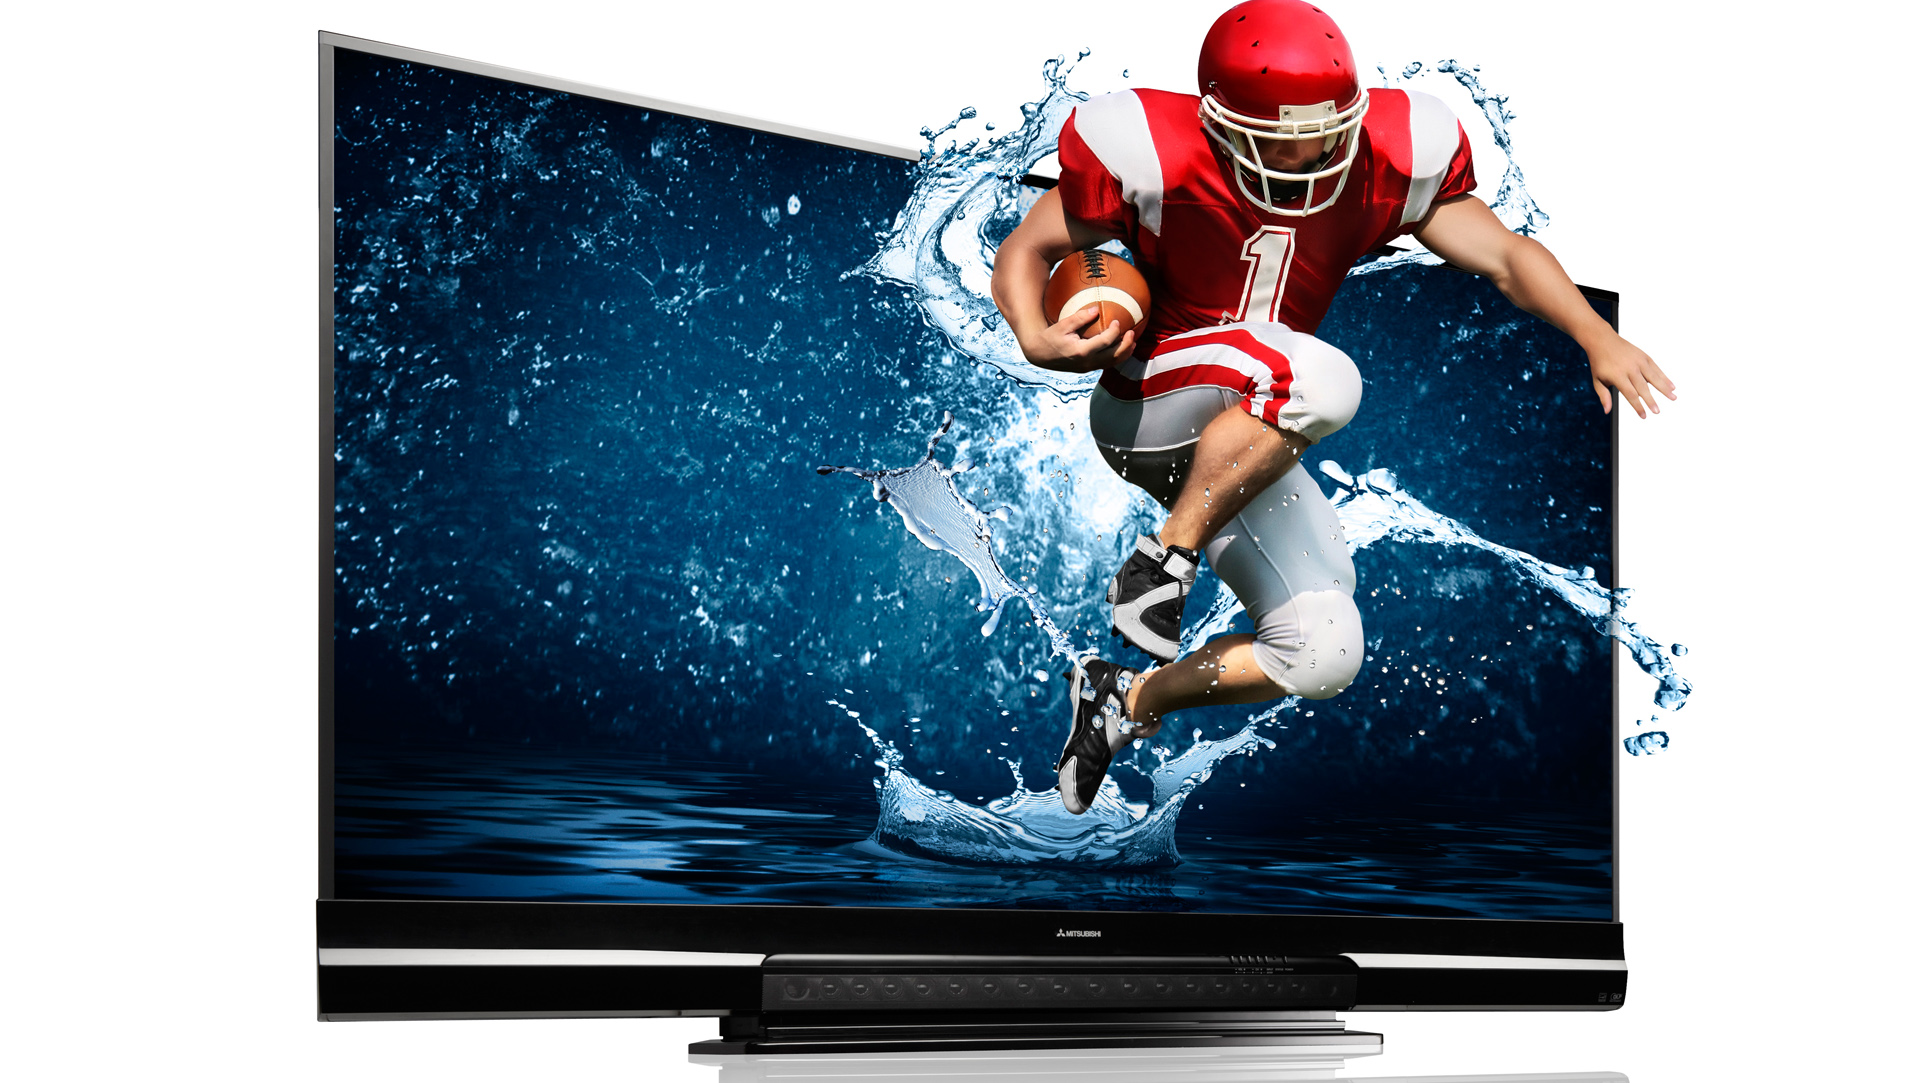 3D TV Market Analysis by Rising Manufacturers & Trends Industry Forecast report 2019 to 2025